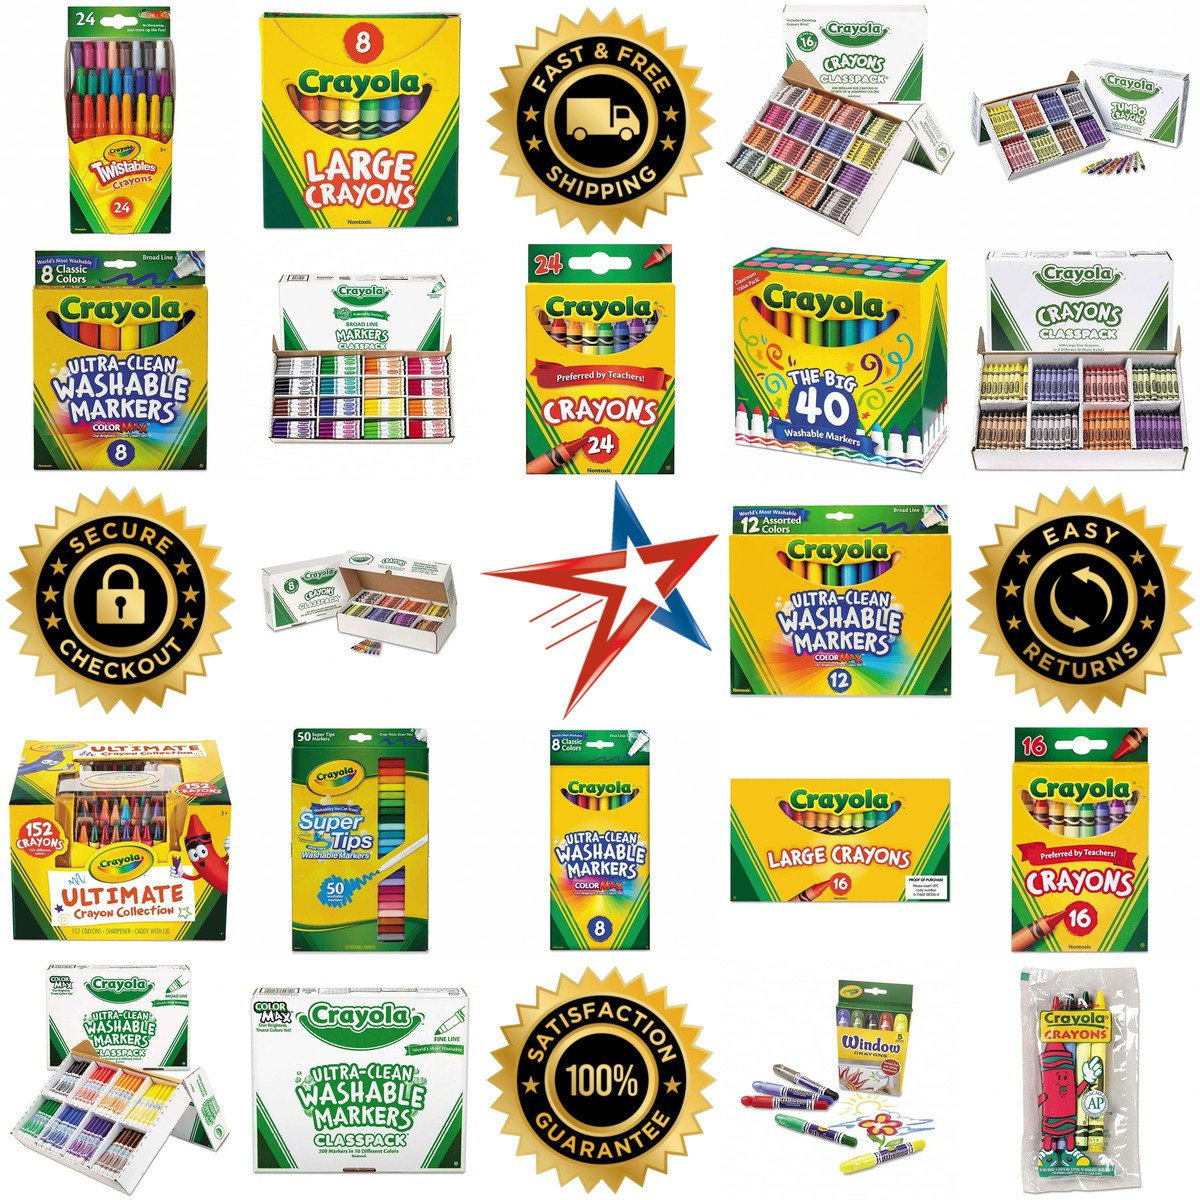 A selection of Crayola products on GoVets